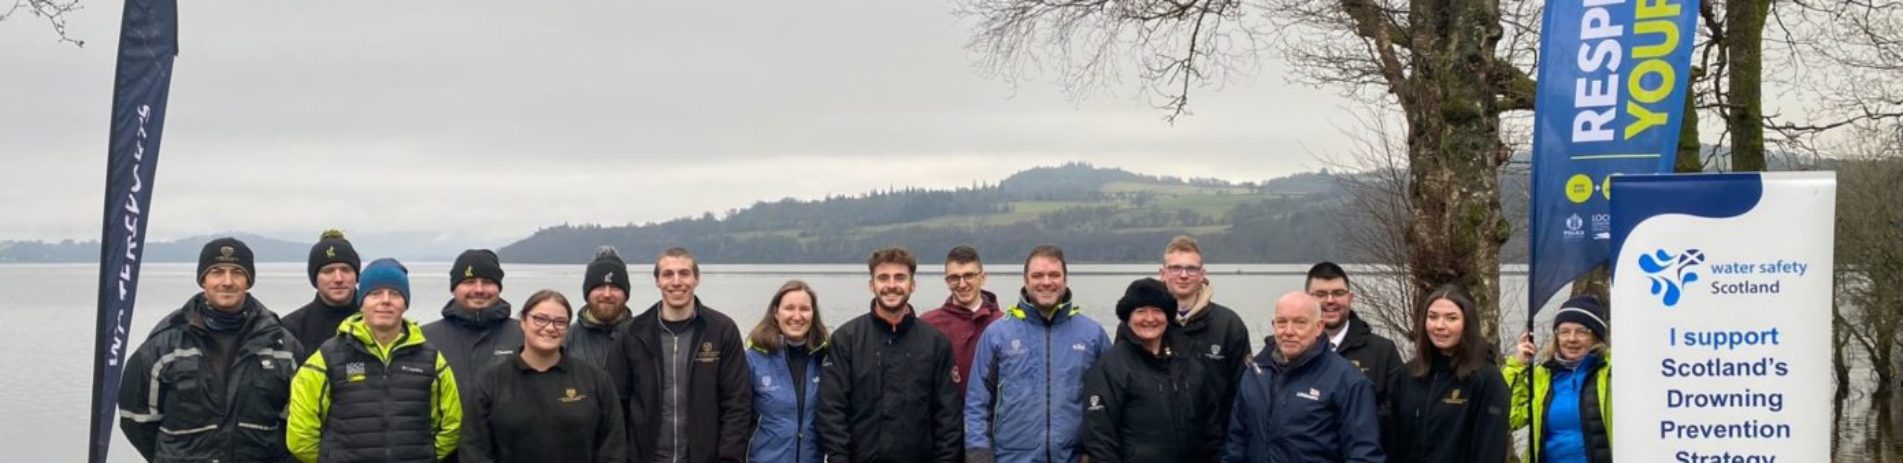 Cameron-House-Hotel-staff-with-National-Park-Rangers-and-RNLI-learning-water-safety-training-at-Loch-Lomond.